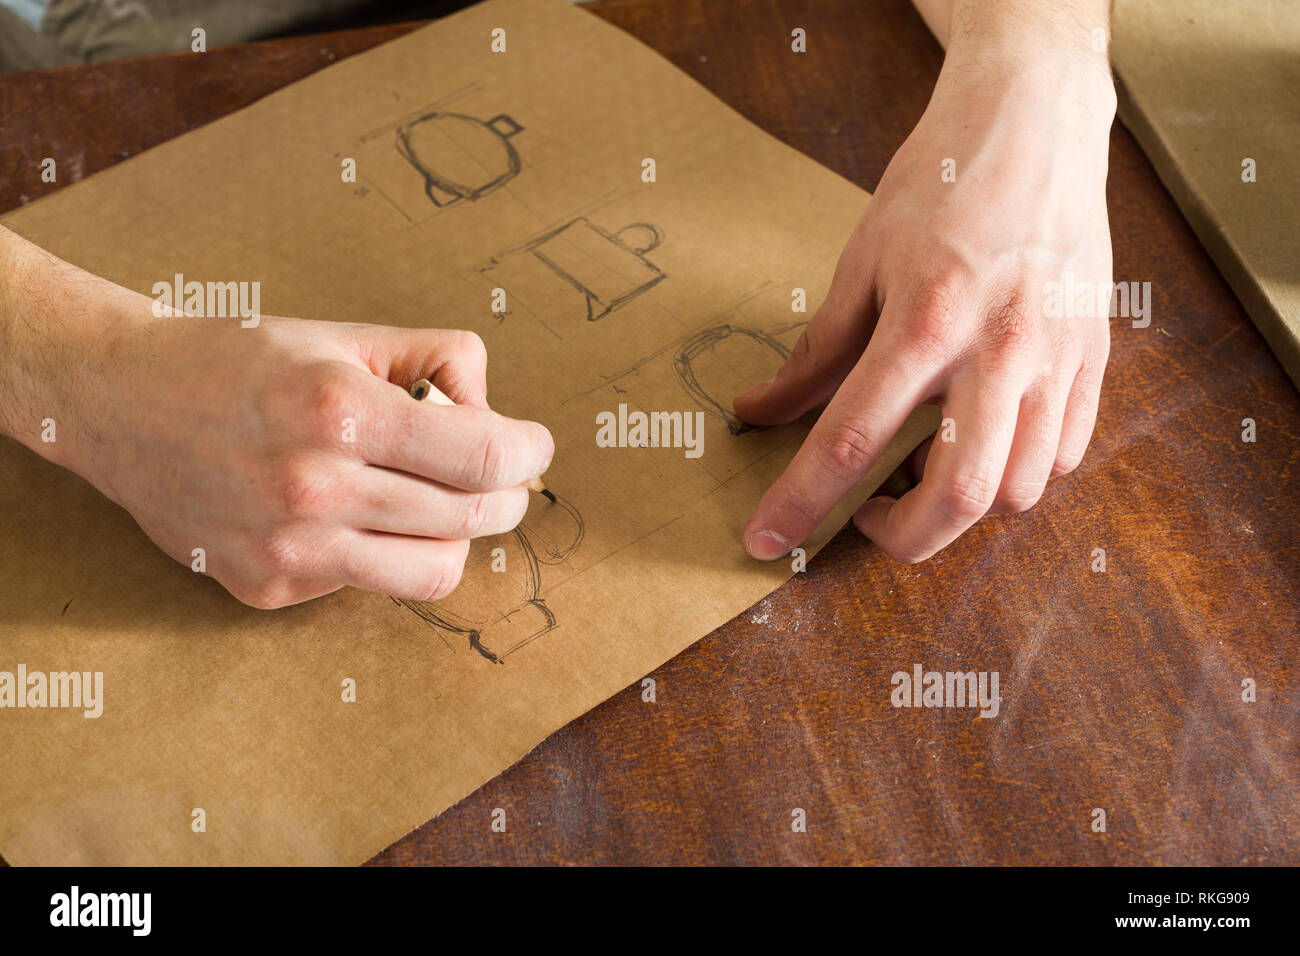 the hand of a man sketching dishes on crafting paper with a pencil, handcrafted work. horizontal picture. Close up Stock Photo